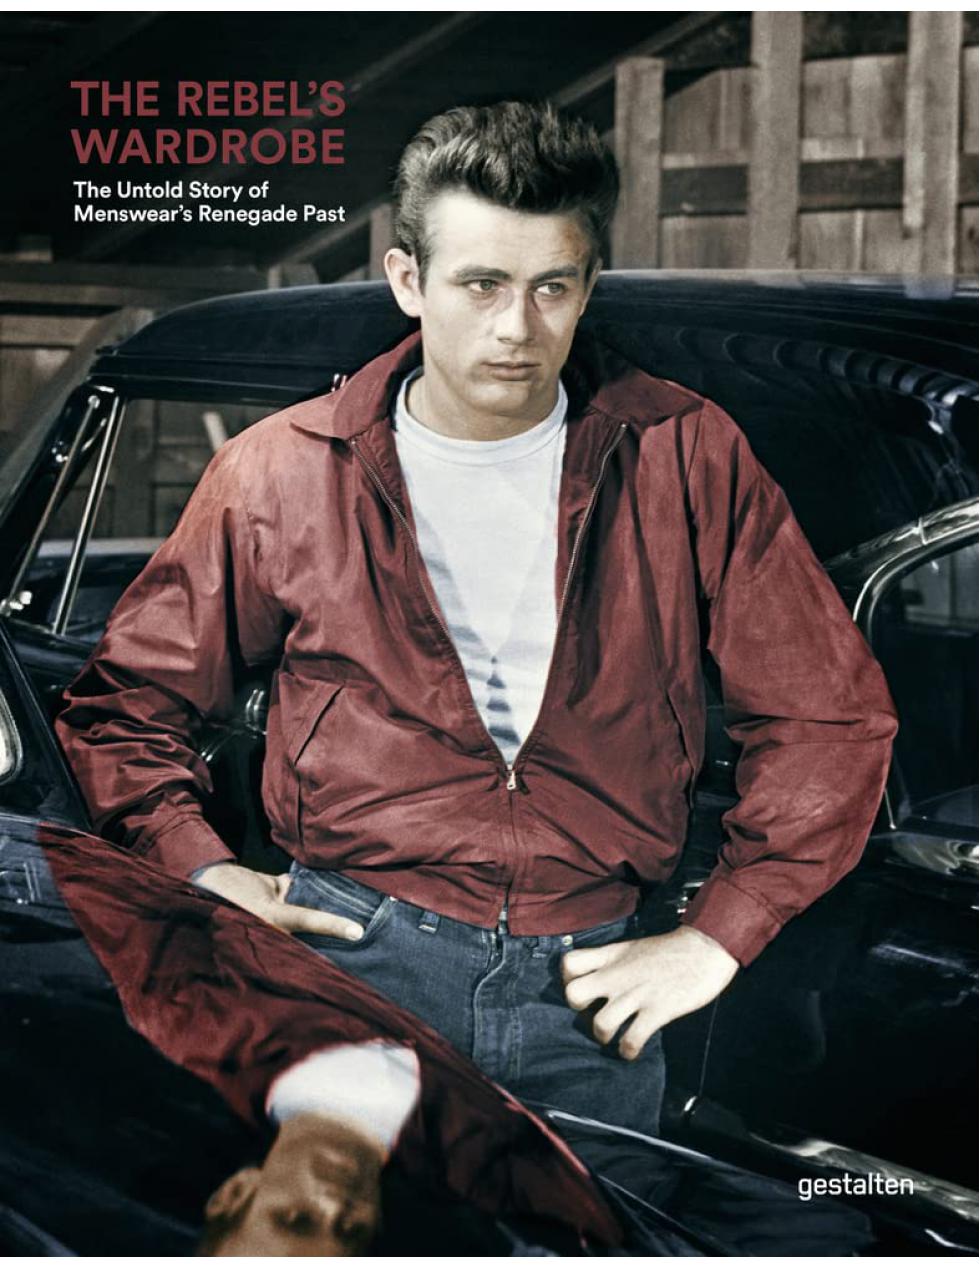 Book: THE REBEL'S WARDROBE - The Untold Story of Menswear's Renegade Past